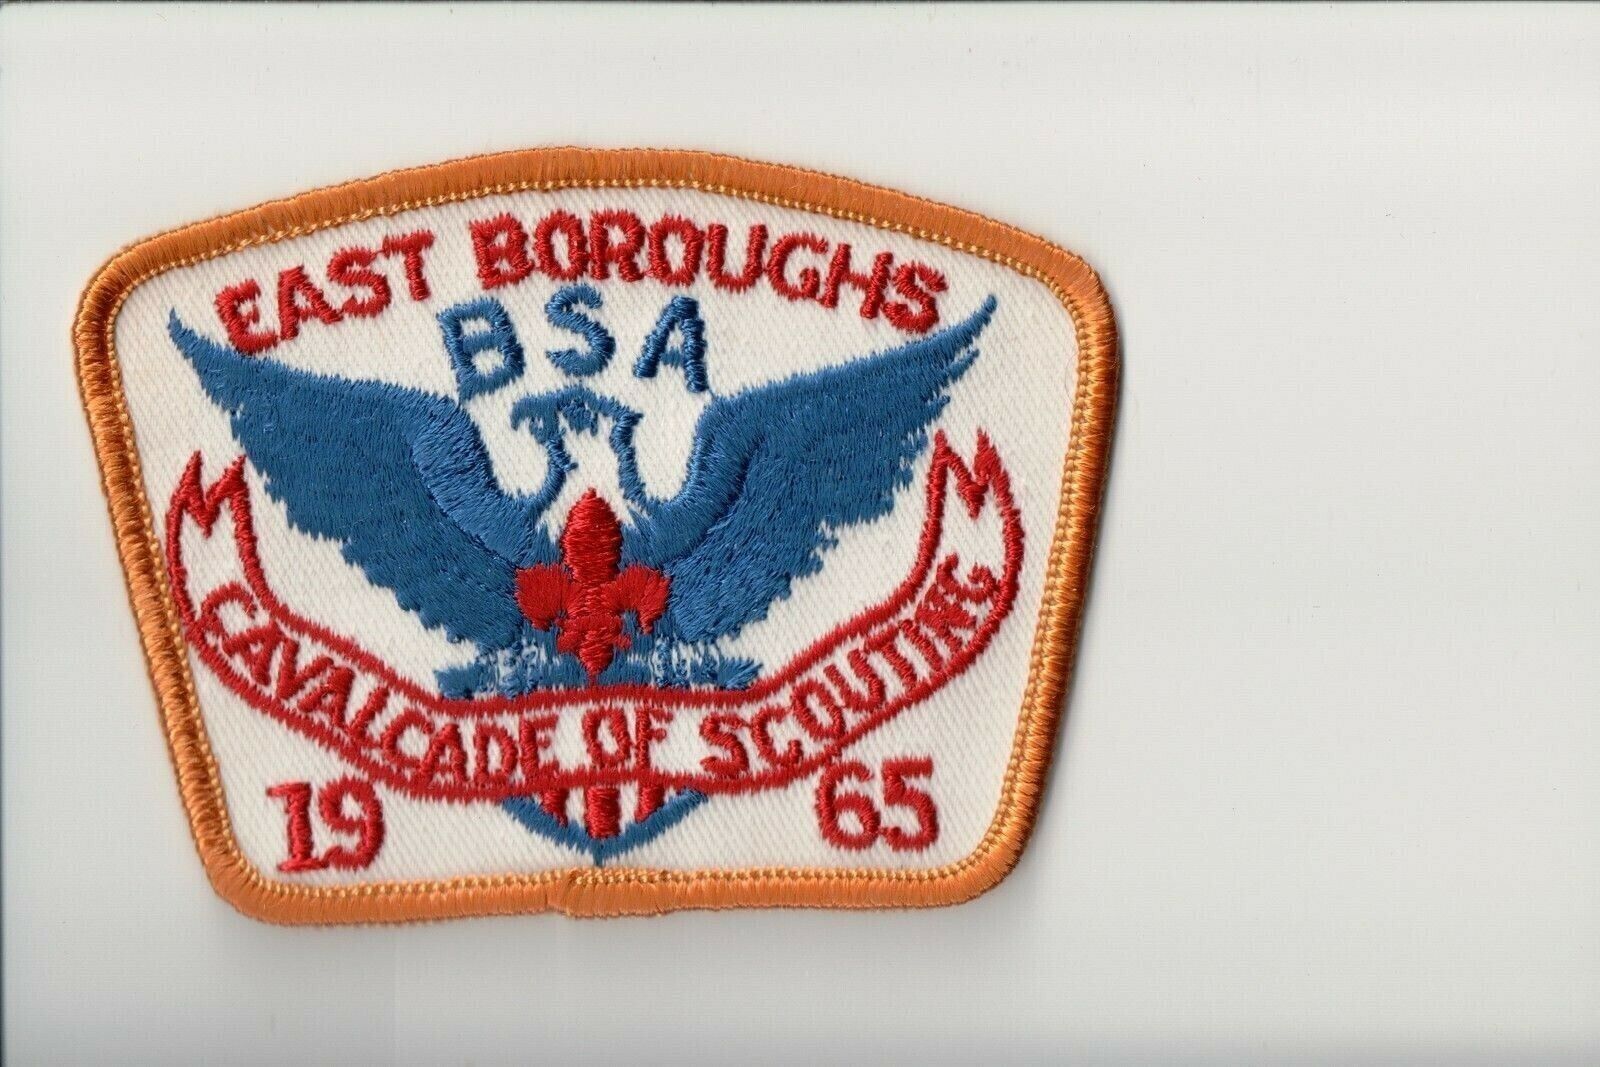 1965 East Boroughs Cavalcade of Scouting patch